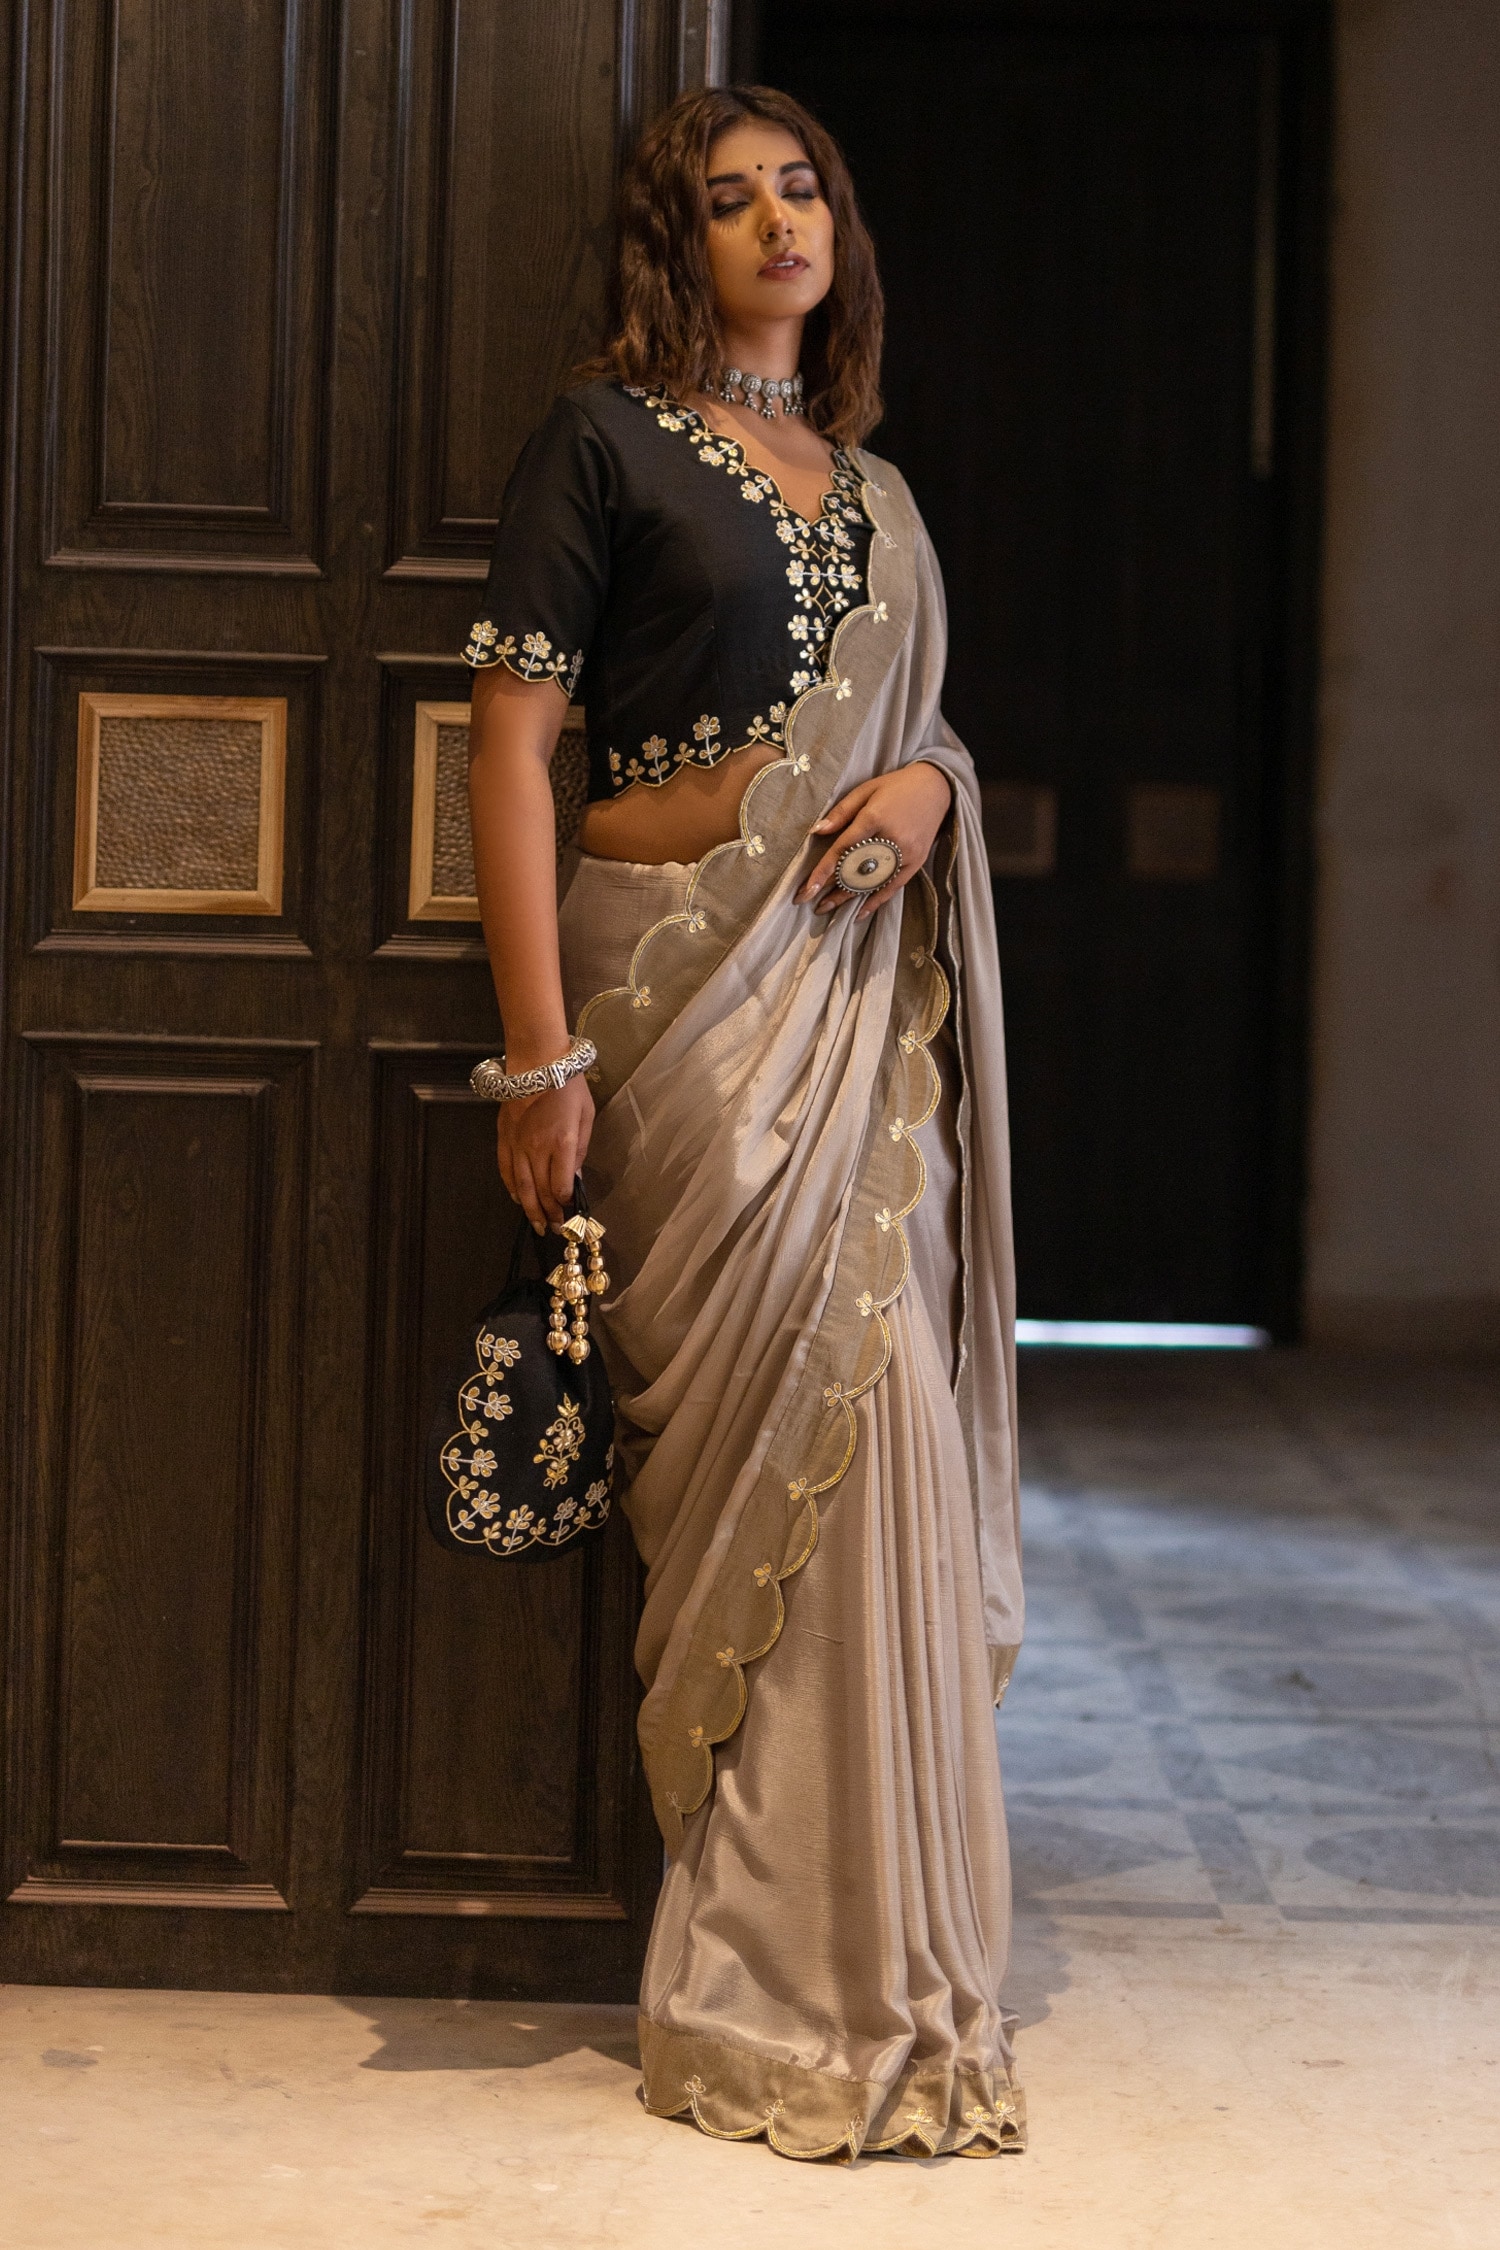 The Home Affair Beige Saree: Chinon Embroidered Gotapatti Border With Gota Blouse For Women